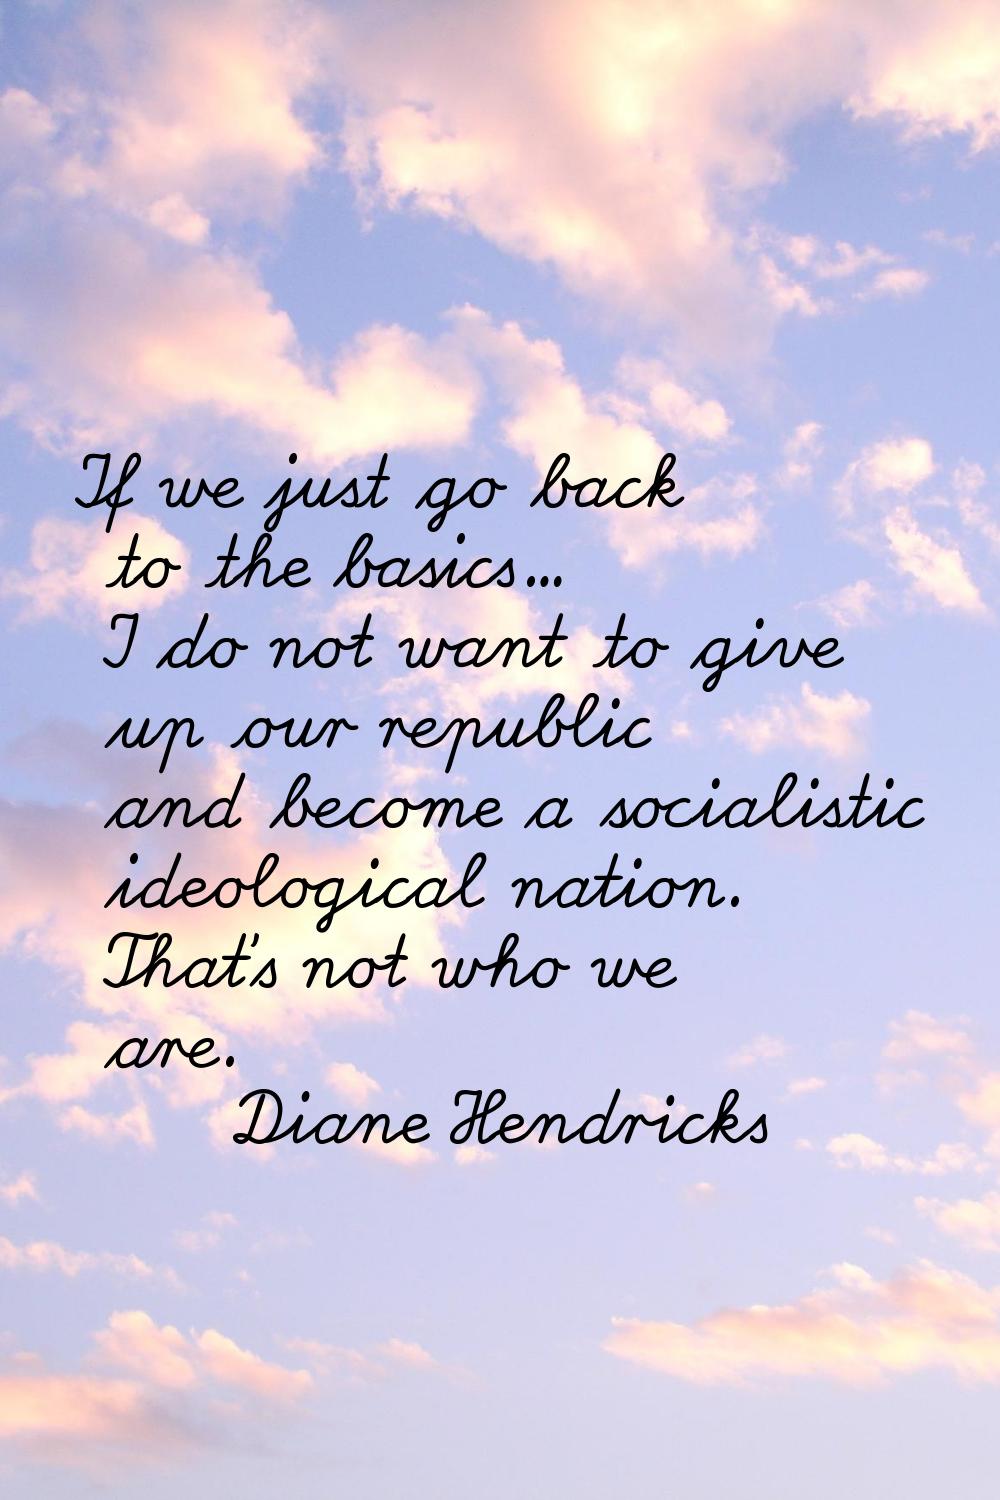 If we just go back to the basics... I do not want to give up our republic and become a socialistic 